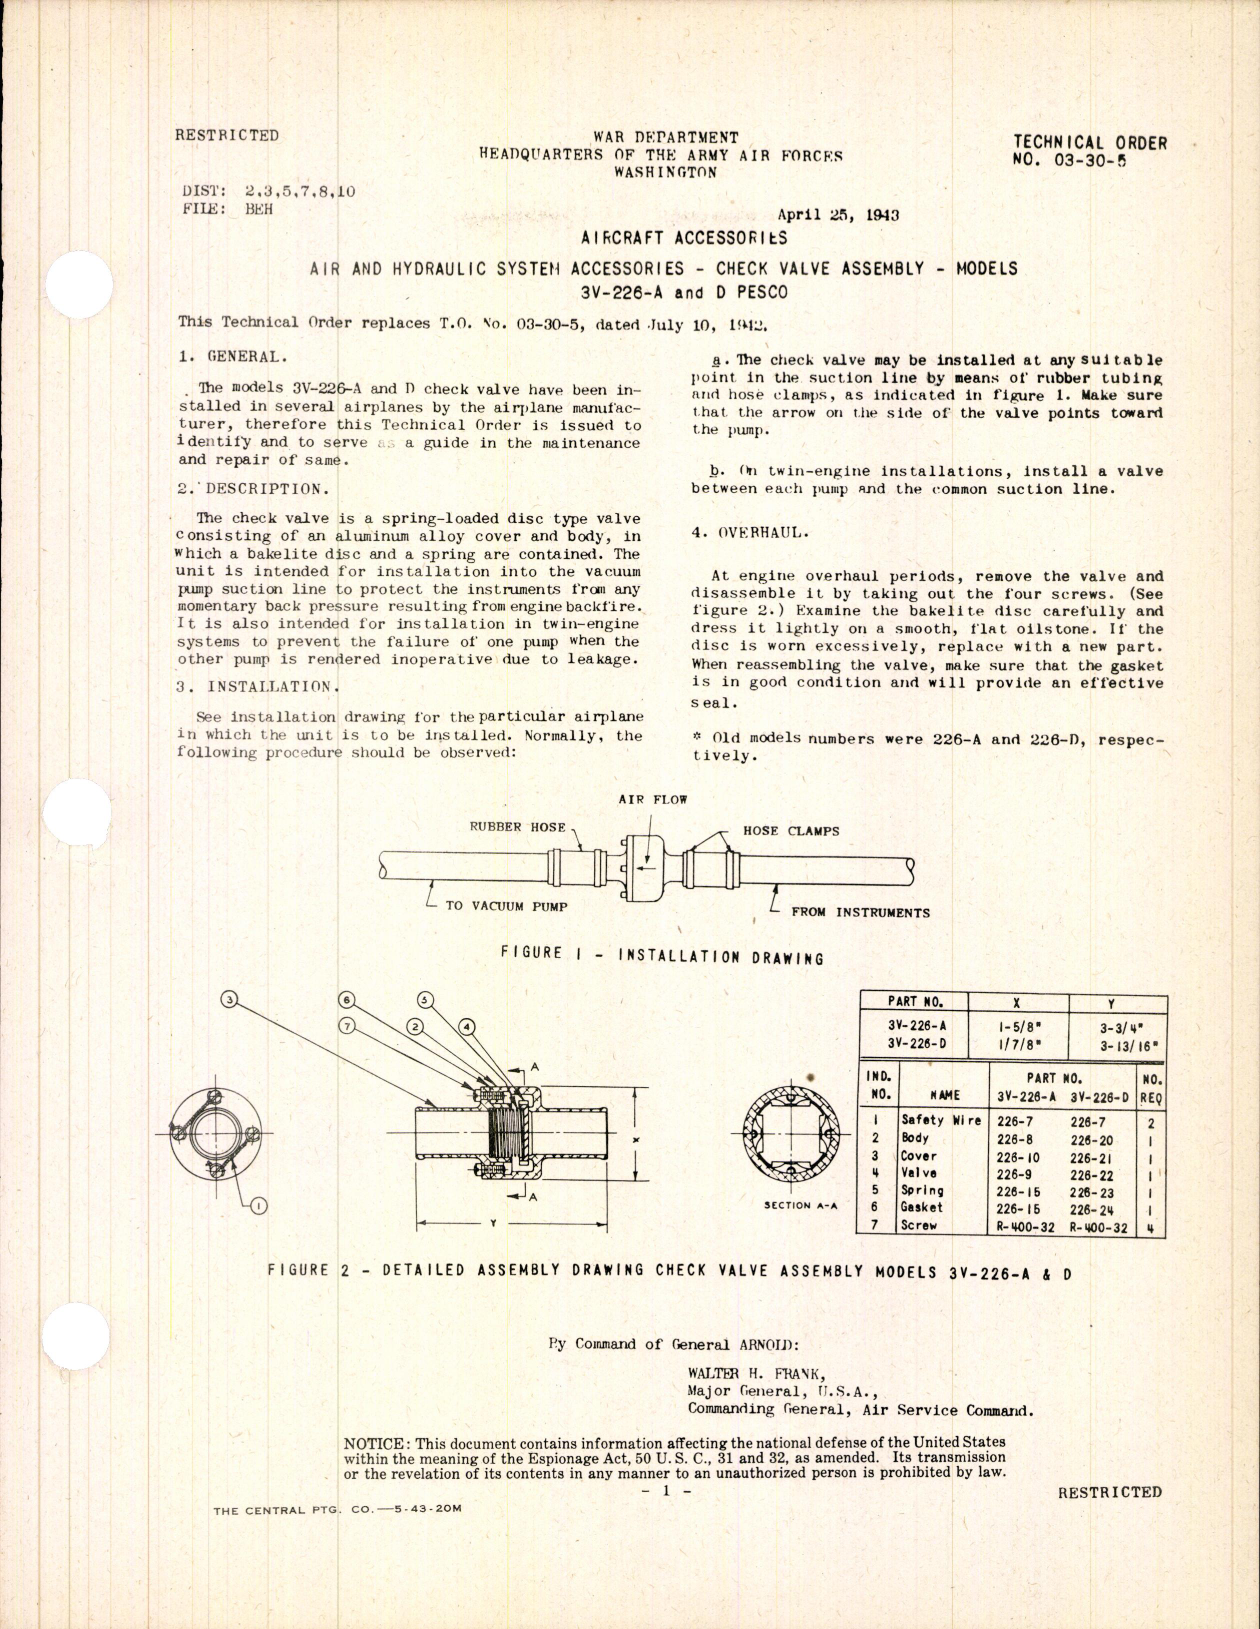 Sample page 1 from AirCorps Library document: Check Valve Assembly Models 3V-226-A and D 